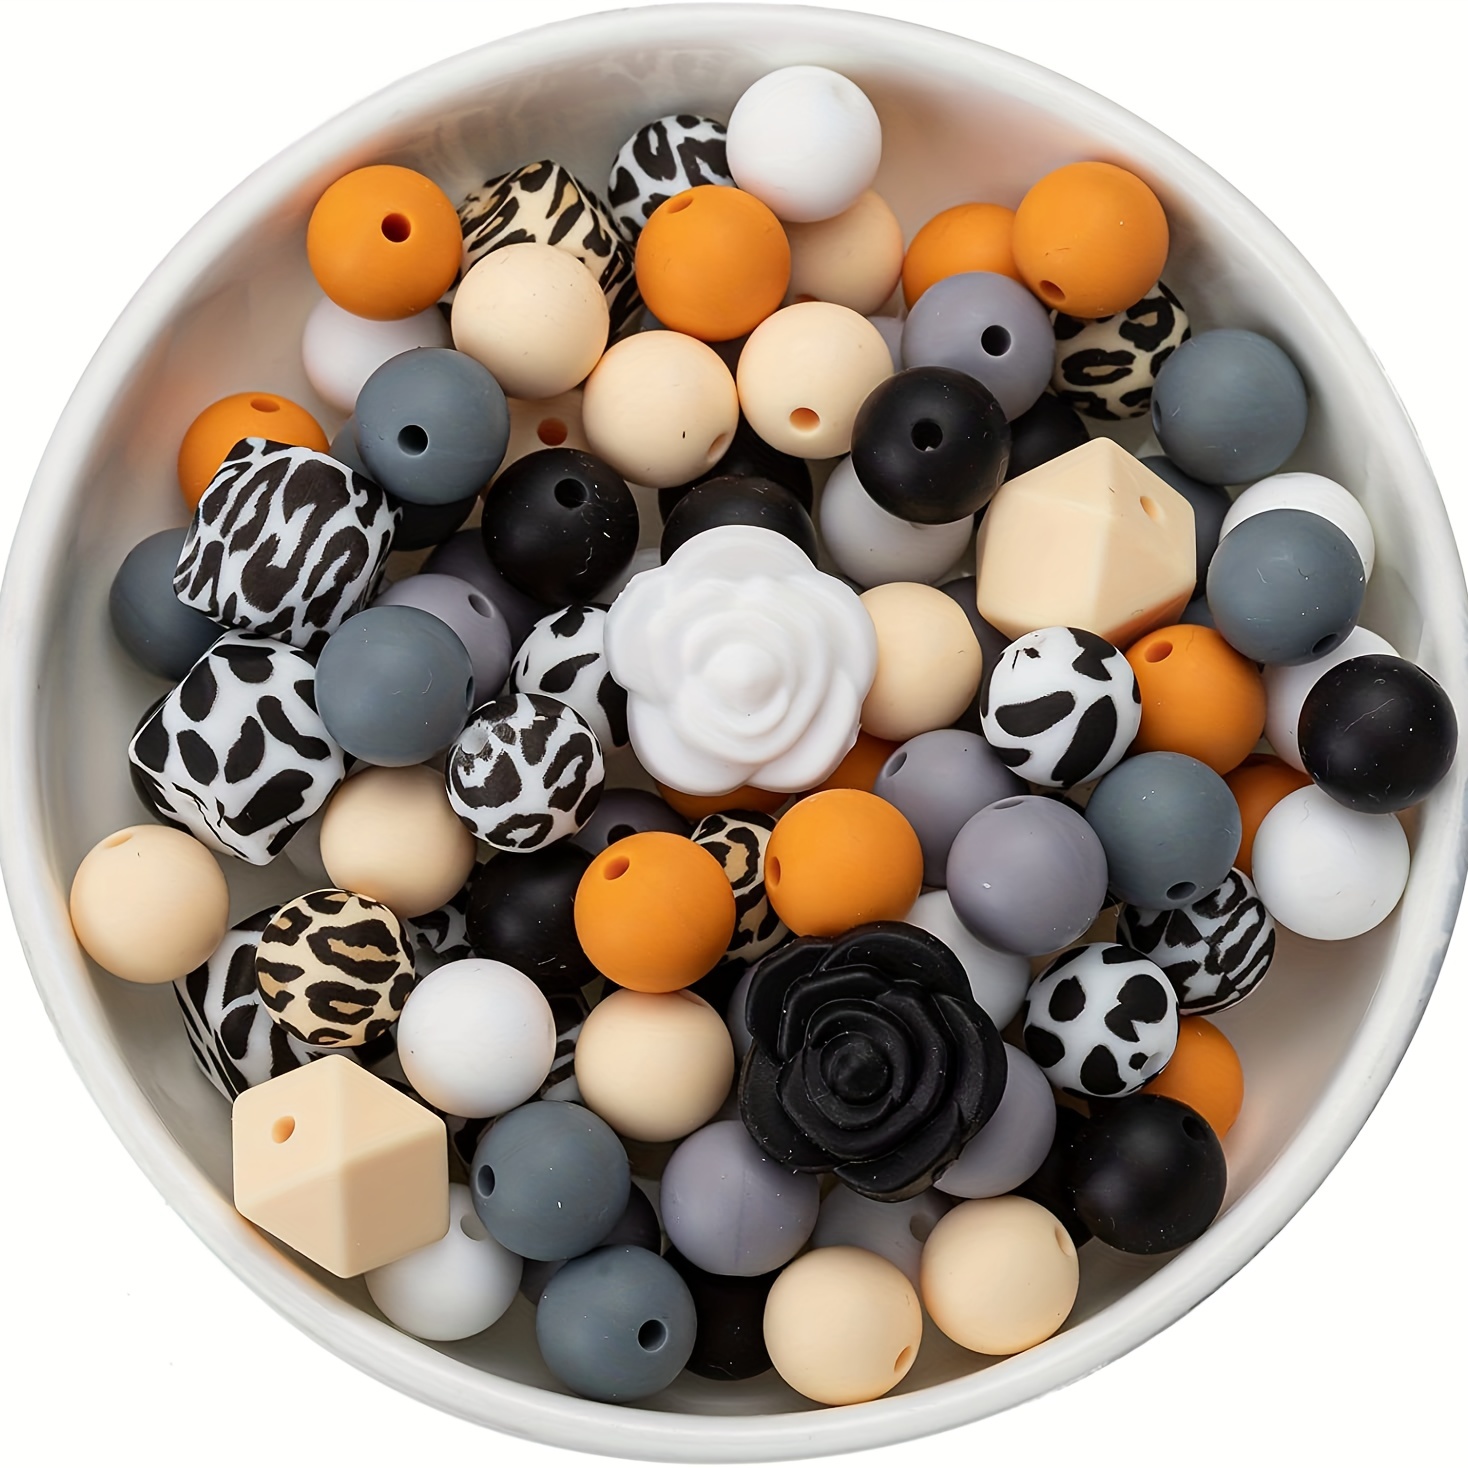  102 Pcs Silicone Beads for Keychain Making, DIY